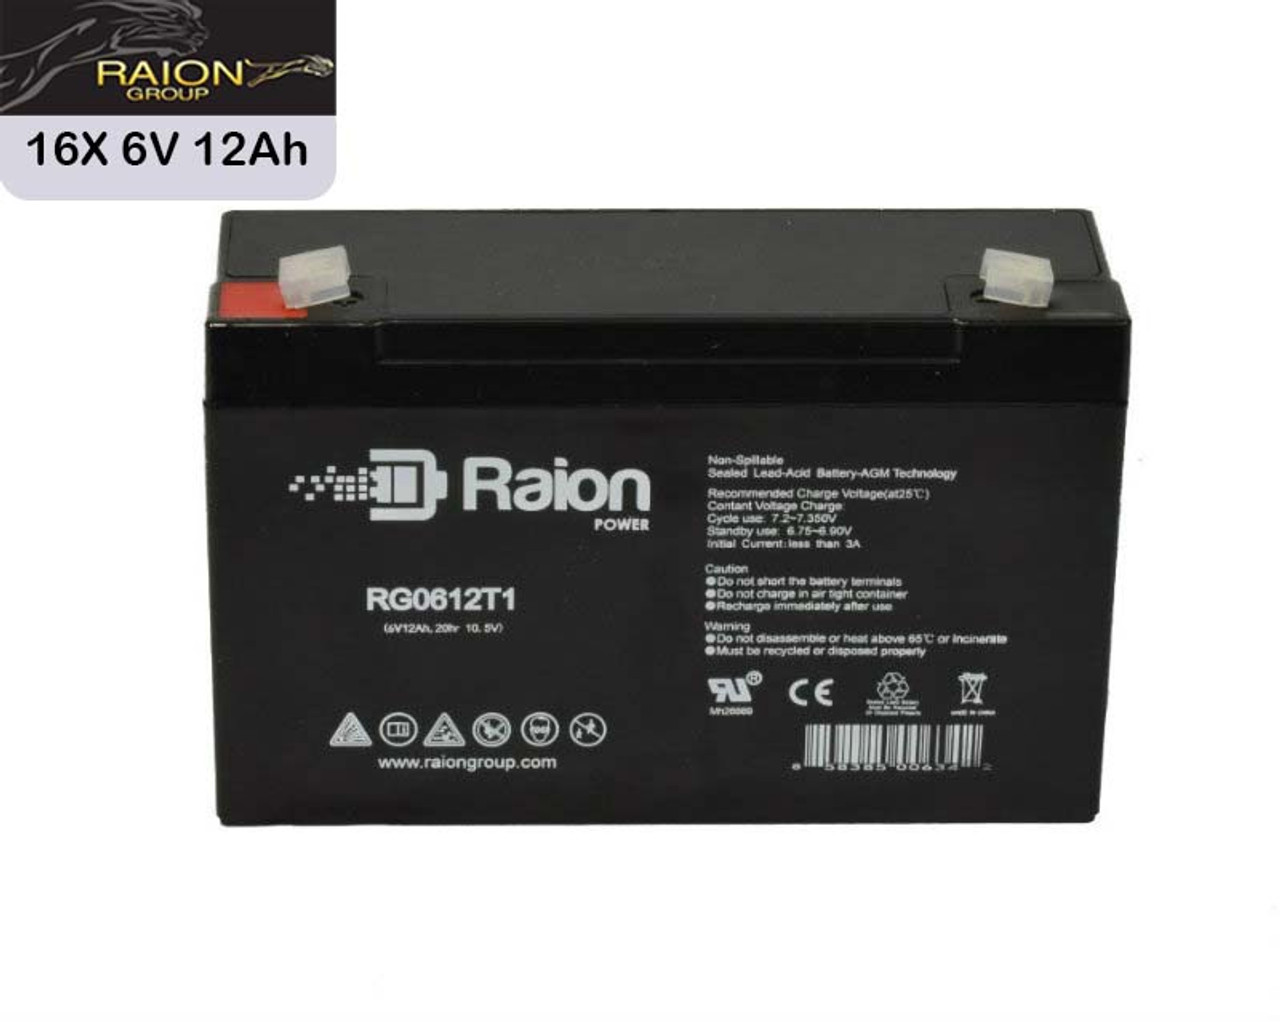 Powerware PW5119-3000RM Replacement 6V 12Ah RG0612T1 UPS Battery - 16 Pack